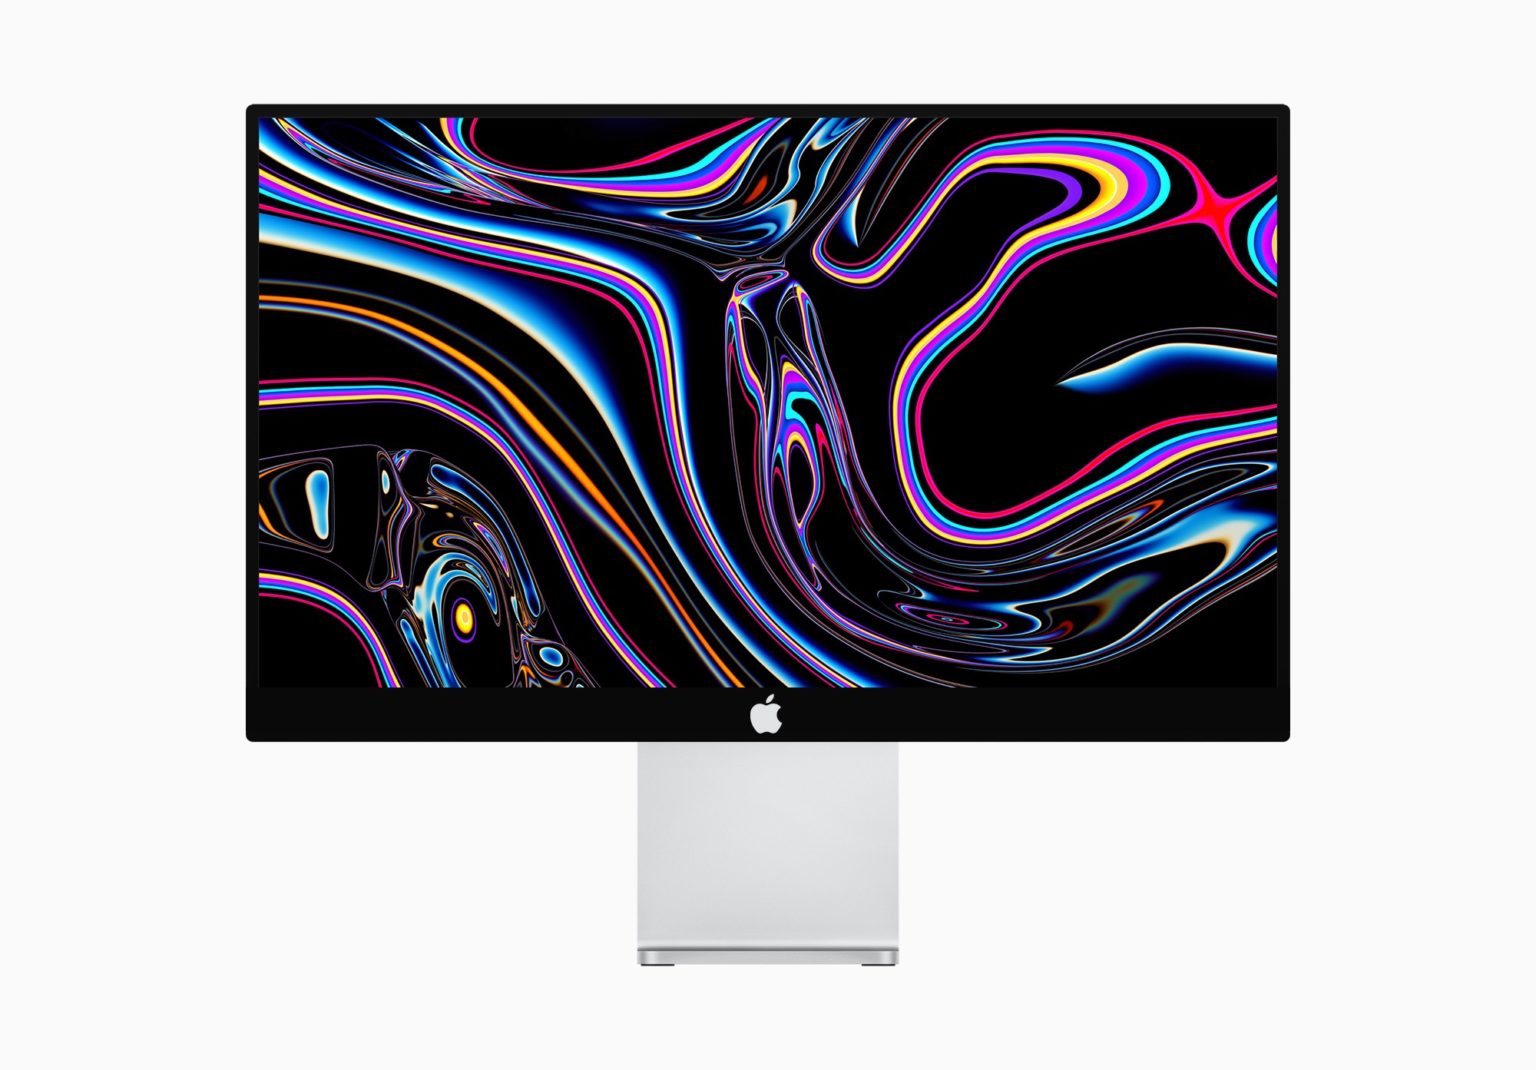 Might a new ARM iMac look like this?